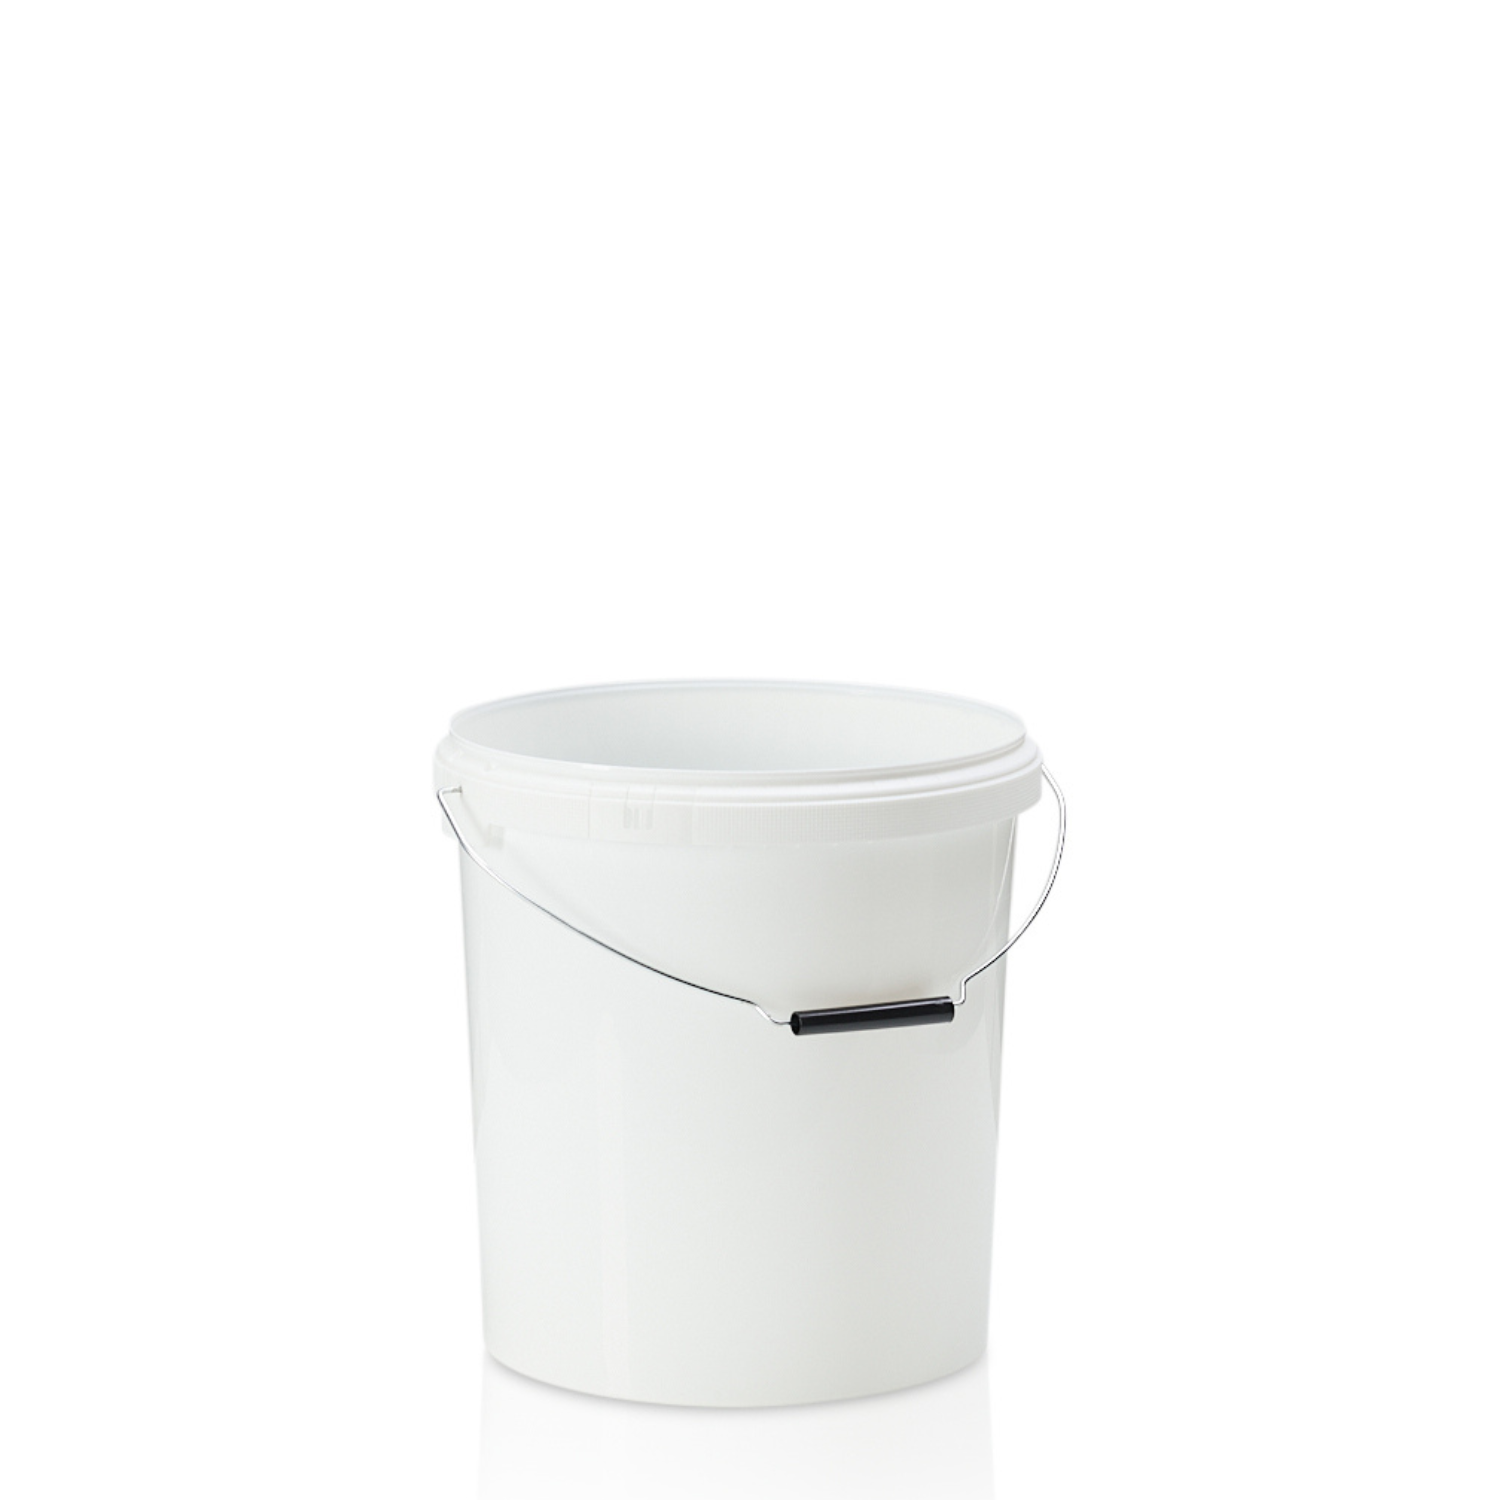 15ltr White PP Tamper Evident Lightweight Pail with Metal Handle